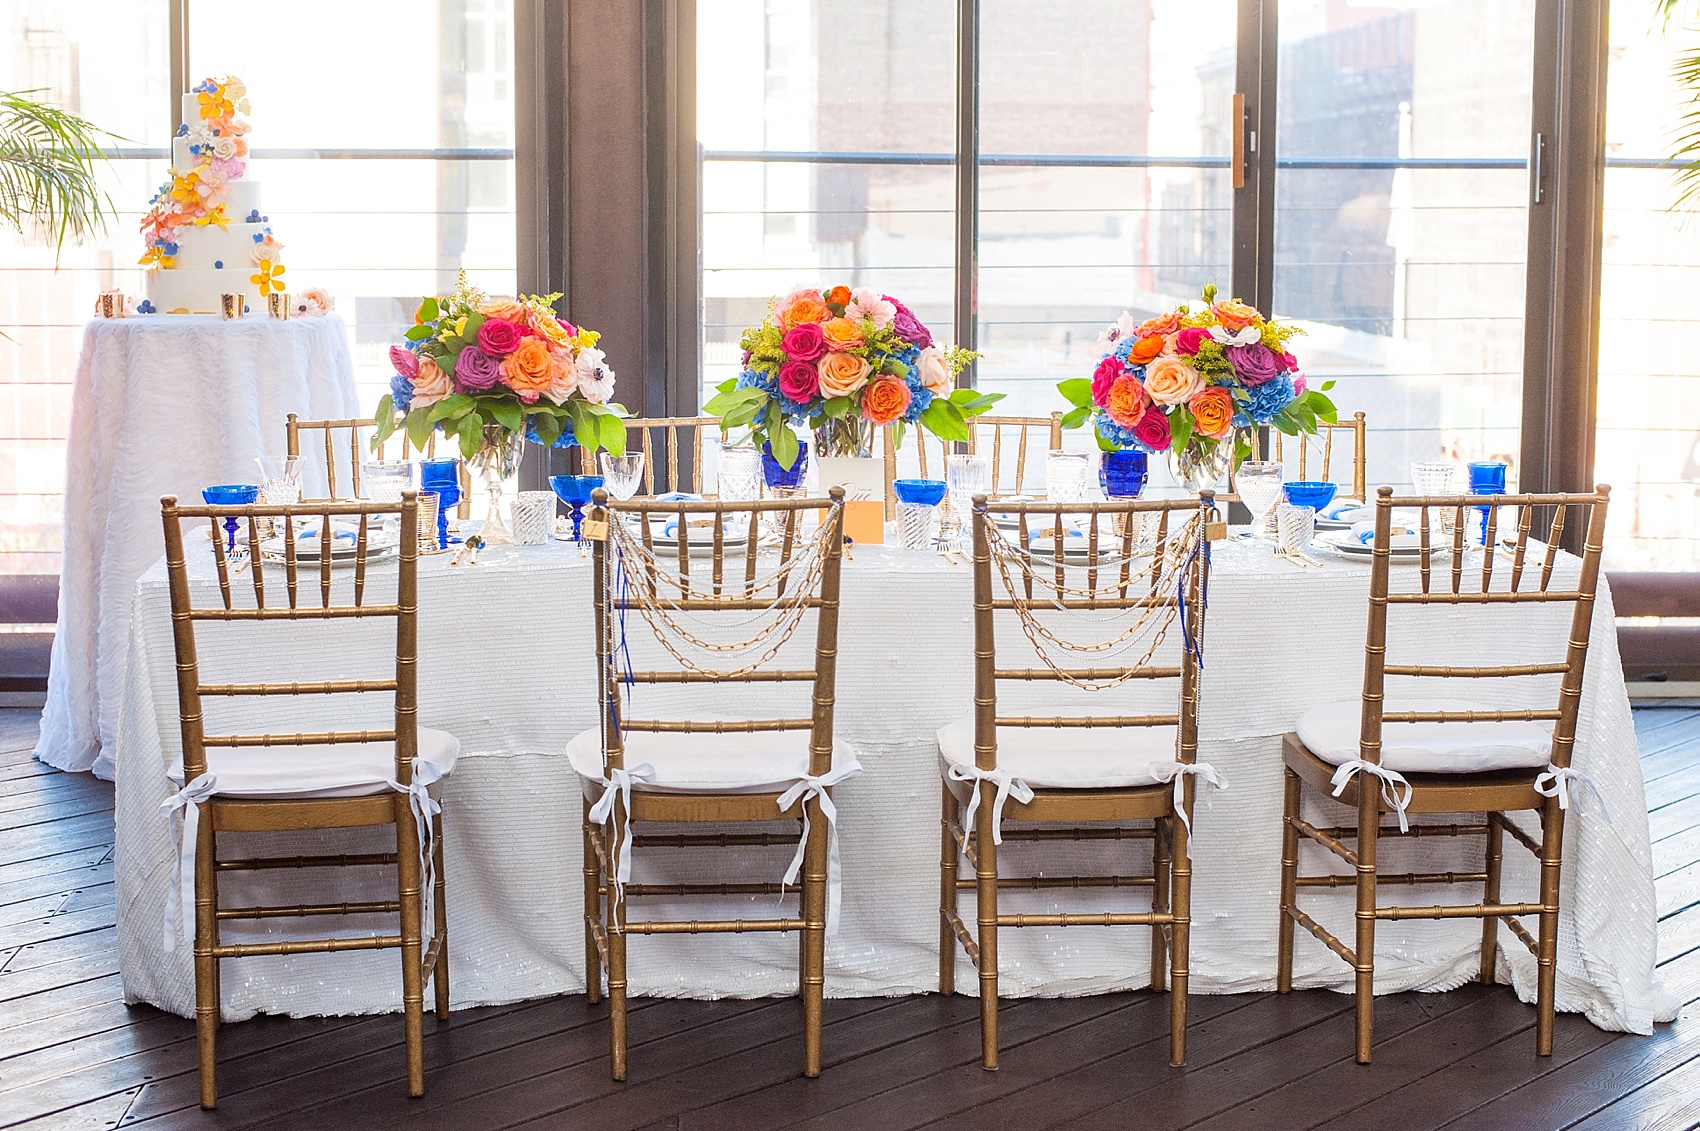 Bright table setting for Lock and Key, Forever Linked, Ponts des Art wedding inspiration. Photos by Mikkel Paige Photography, planning by Dulce Dream Events. 